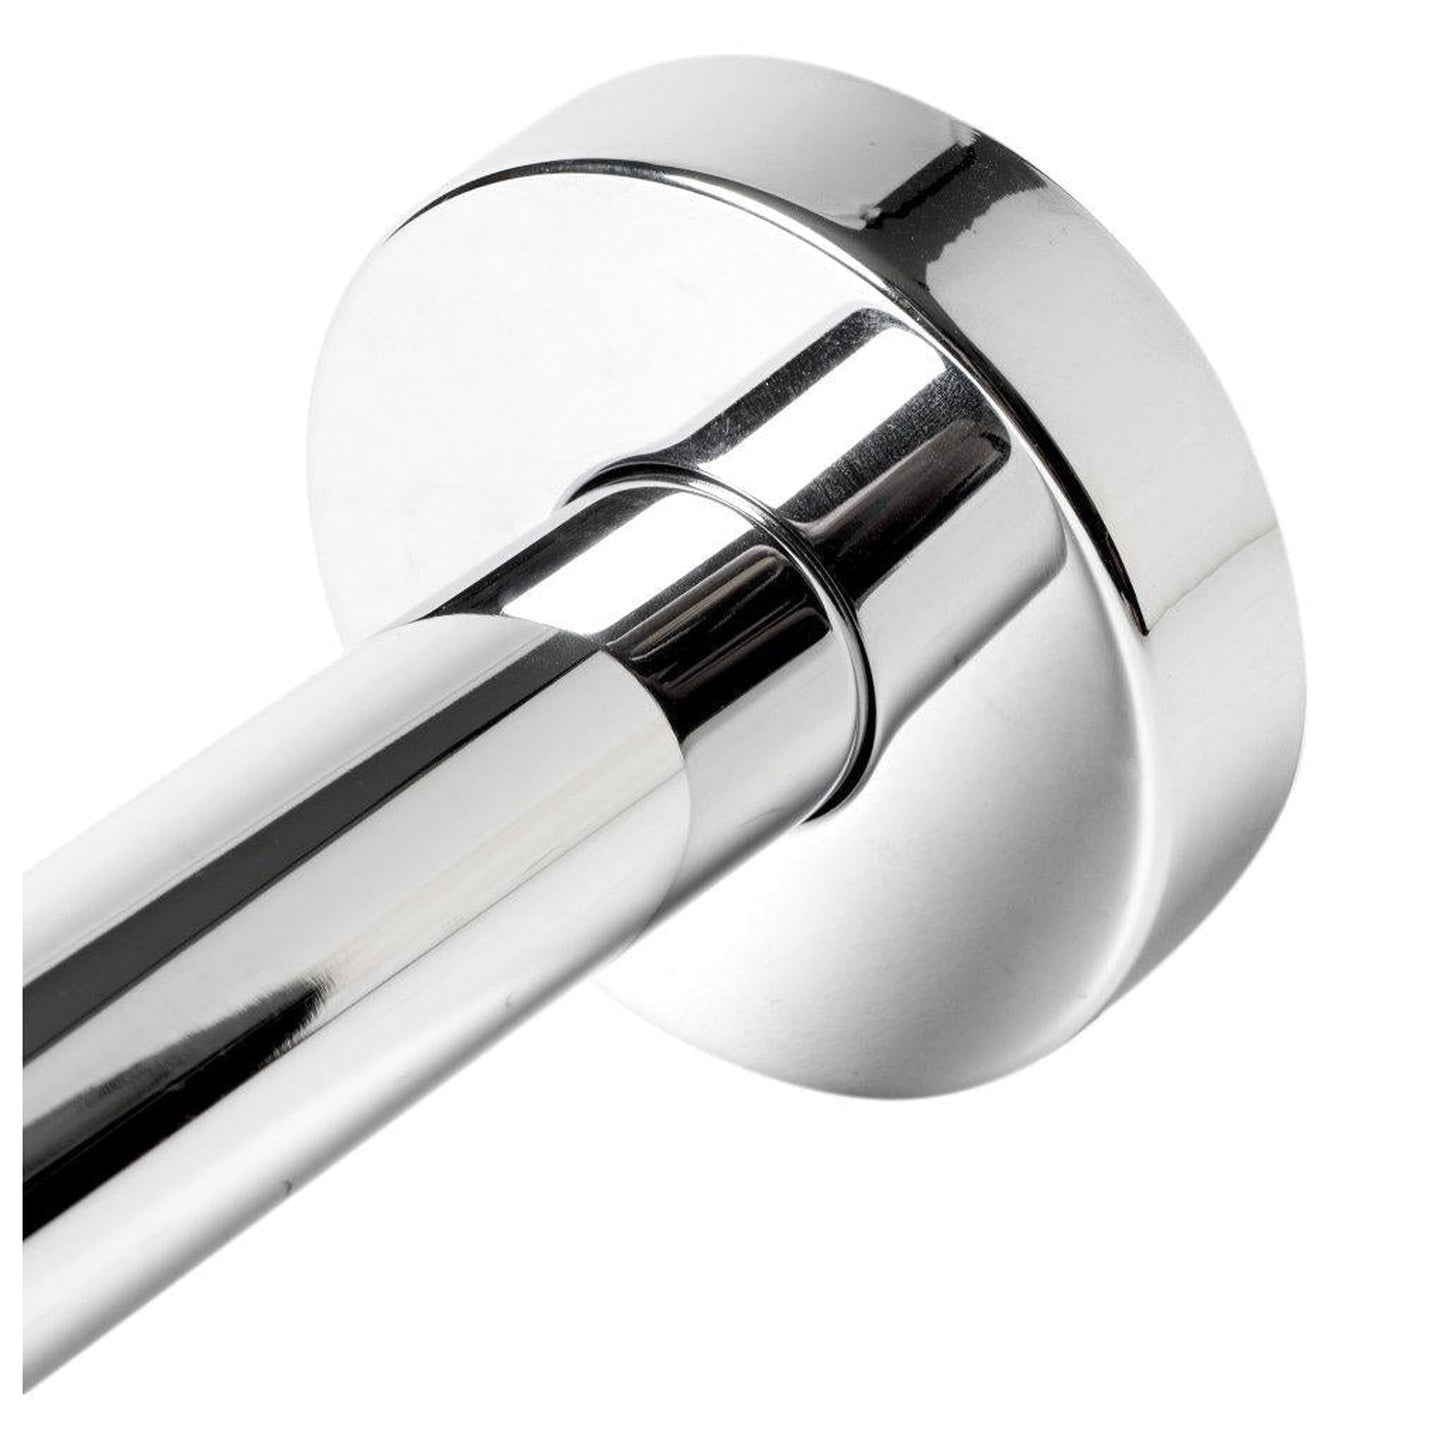 ALFI Brand ABSA6R-PC 6" Polished Chrome Ceiling Mounted Round Solid Brass Shower Arm